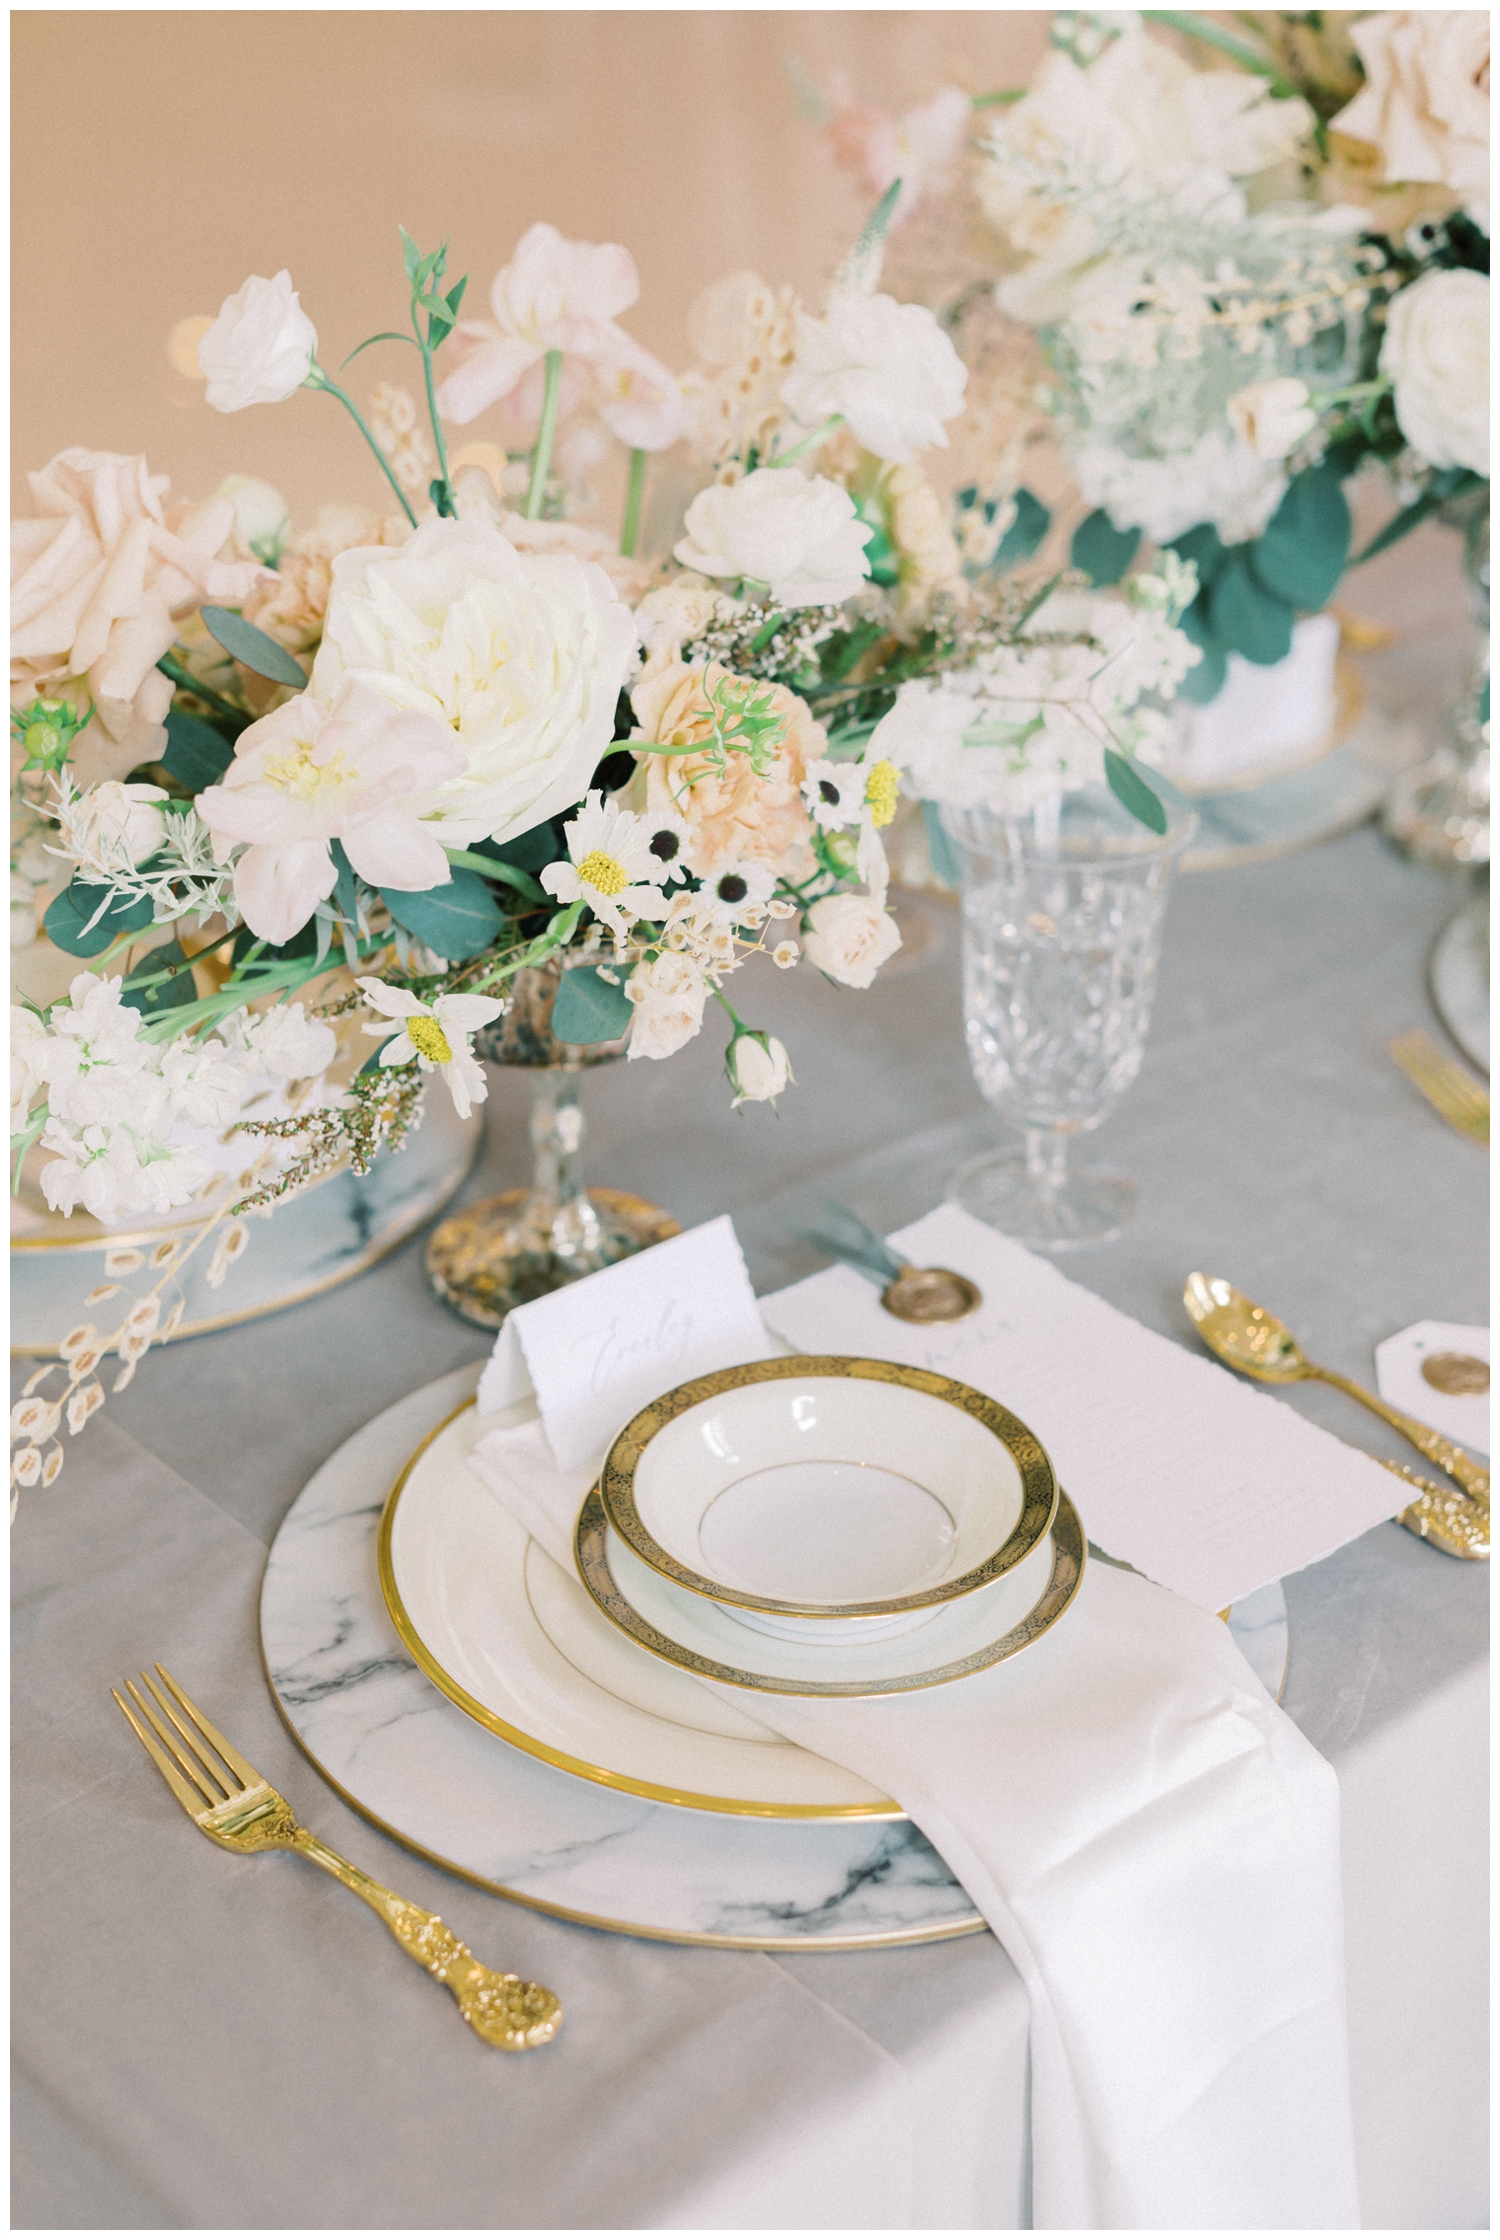 gold and white china place setting for Elevate and Educate styled shoot at the wedding venue Citadel Houston